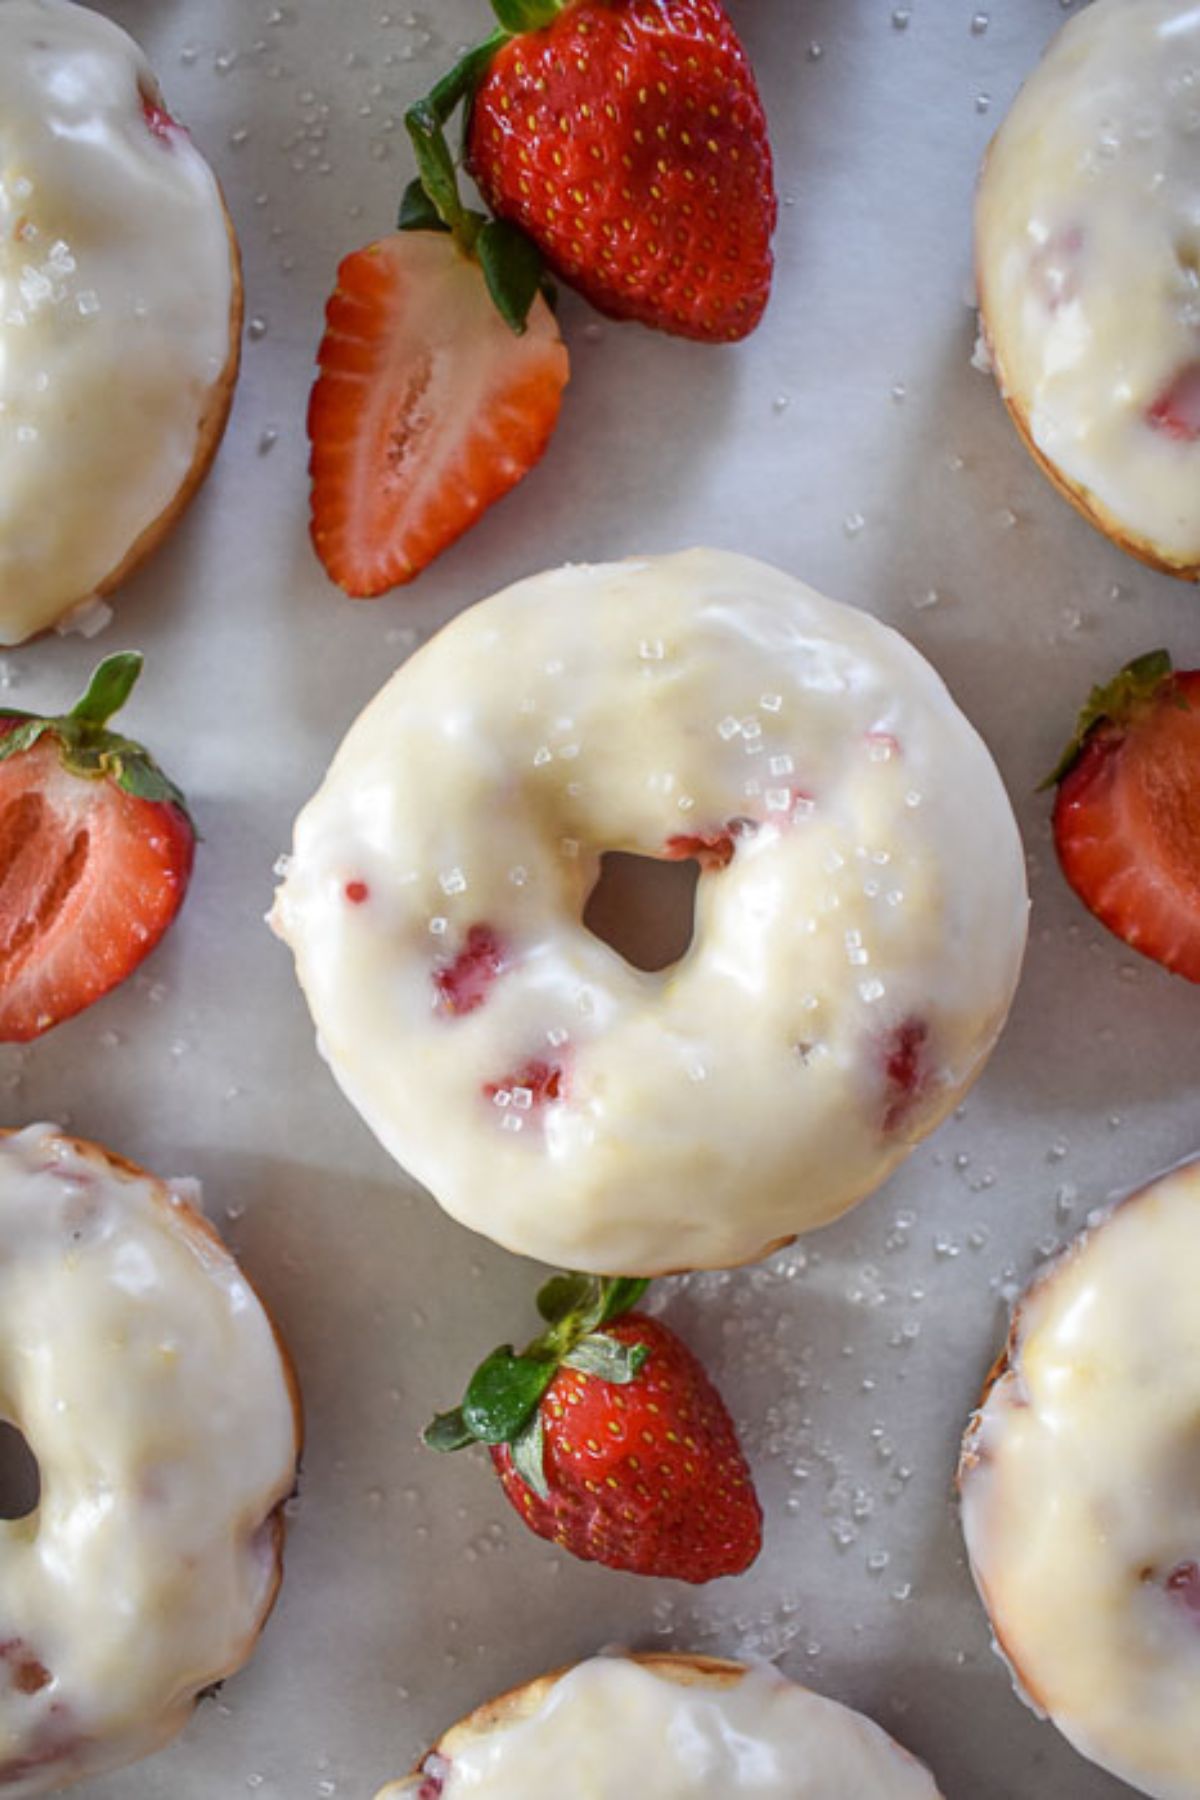 the best champagne spiked Valentine's donuts  surrounded by fresh strawberries and sprinkled with sugar crystals.